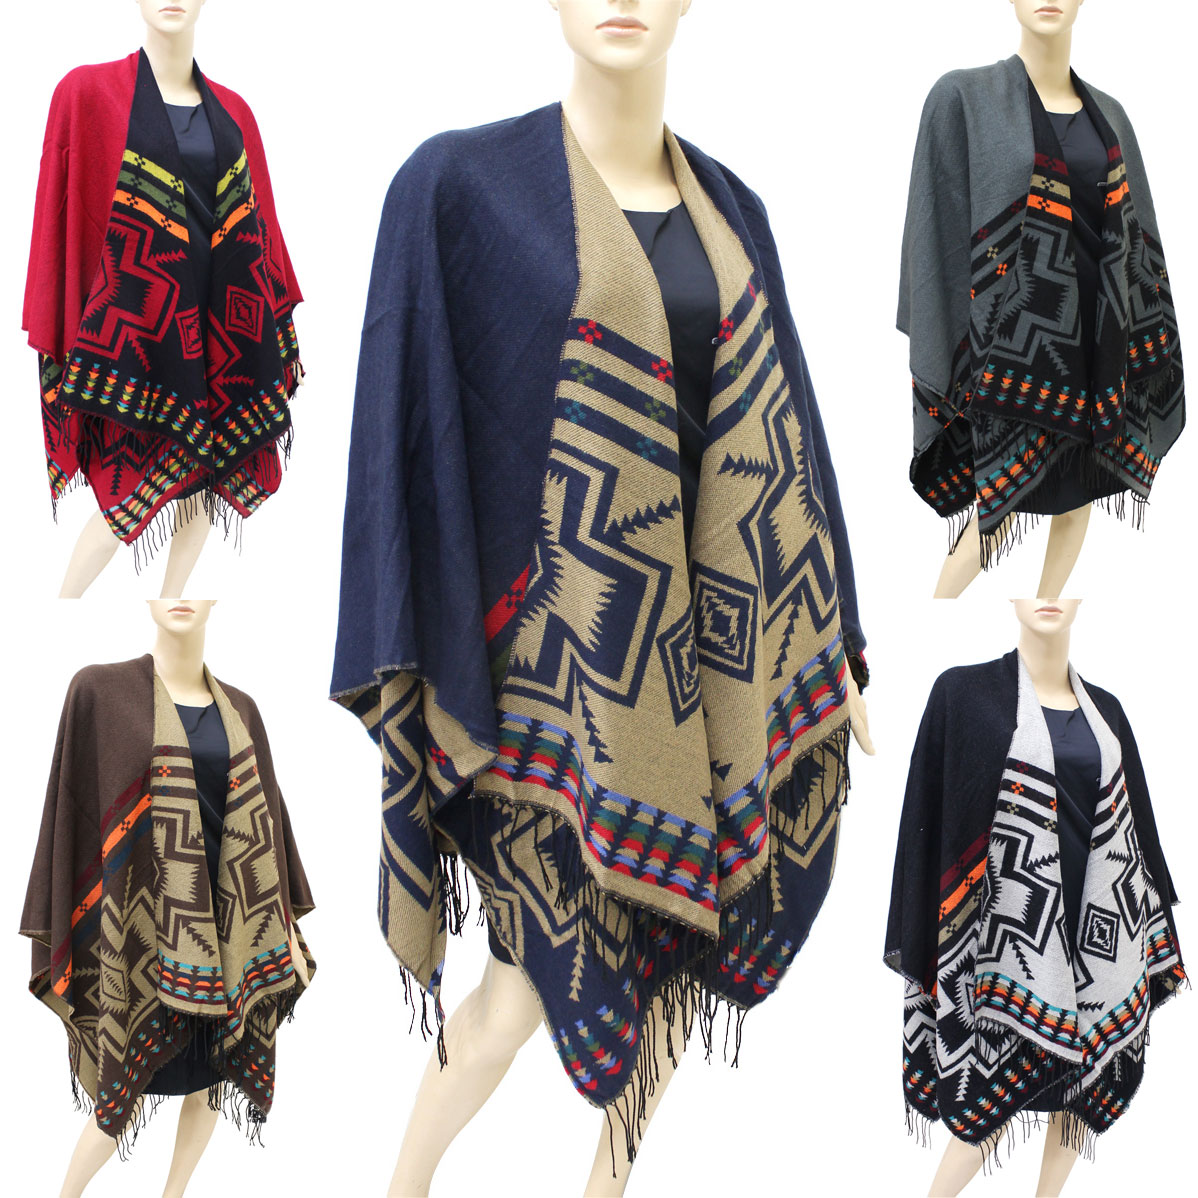 NW Wholesale Scarves Reviews - 3 Reviews of Nywholesalescarves.com ...